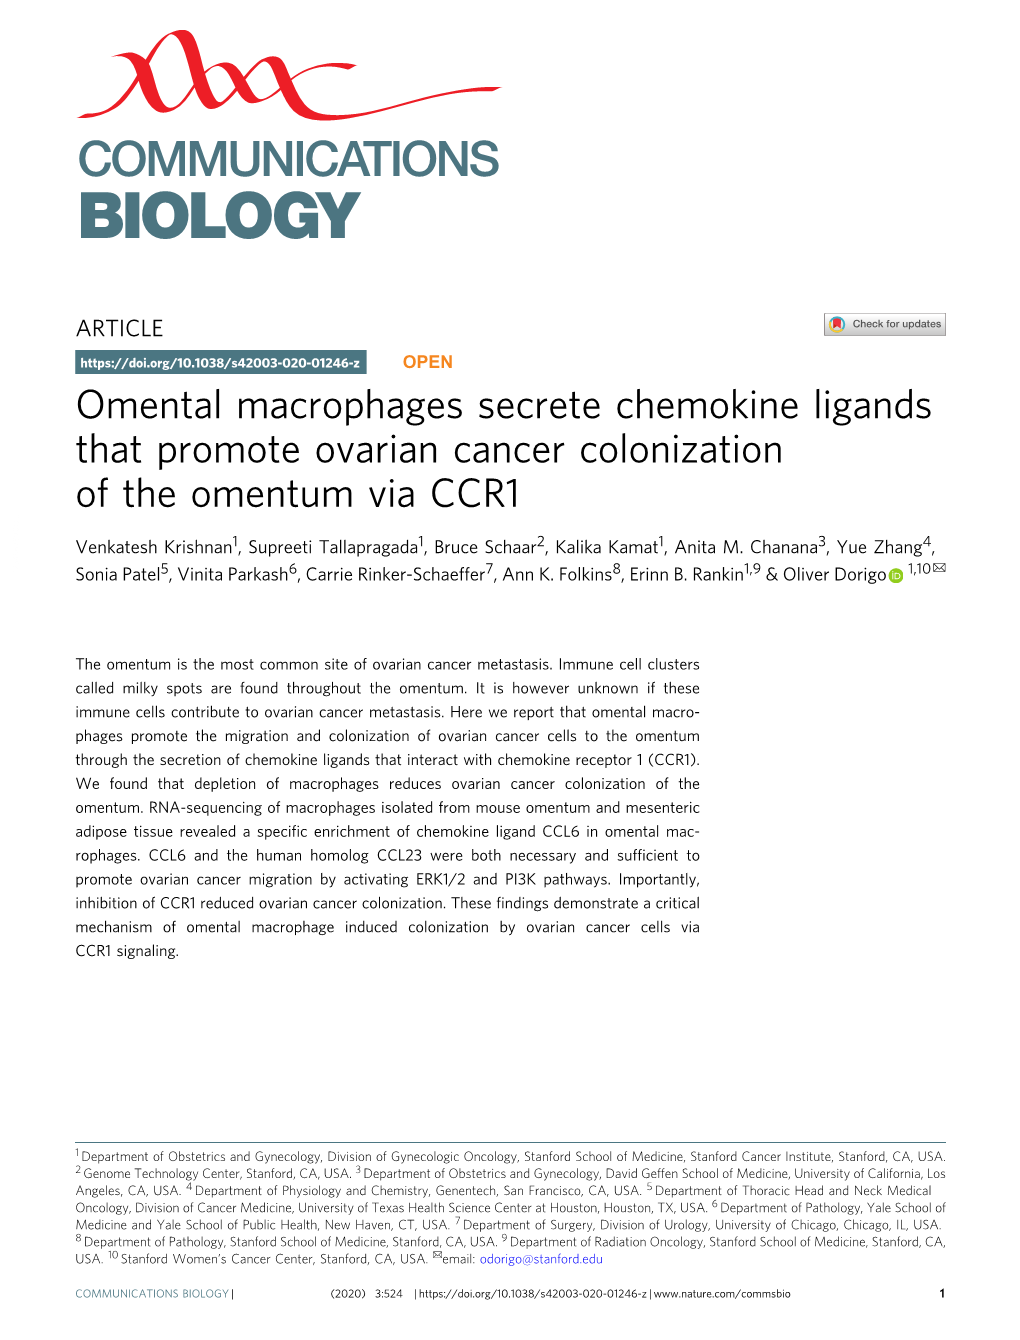 Omental Macrophages Secrete Chemokine Ligands That Promote Ovarian Cancer Colonization of the Omentum Via CCR1